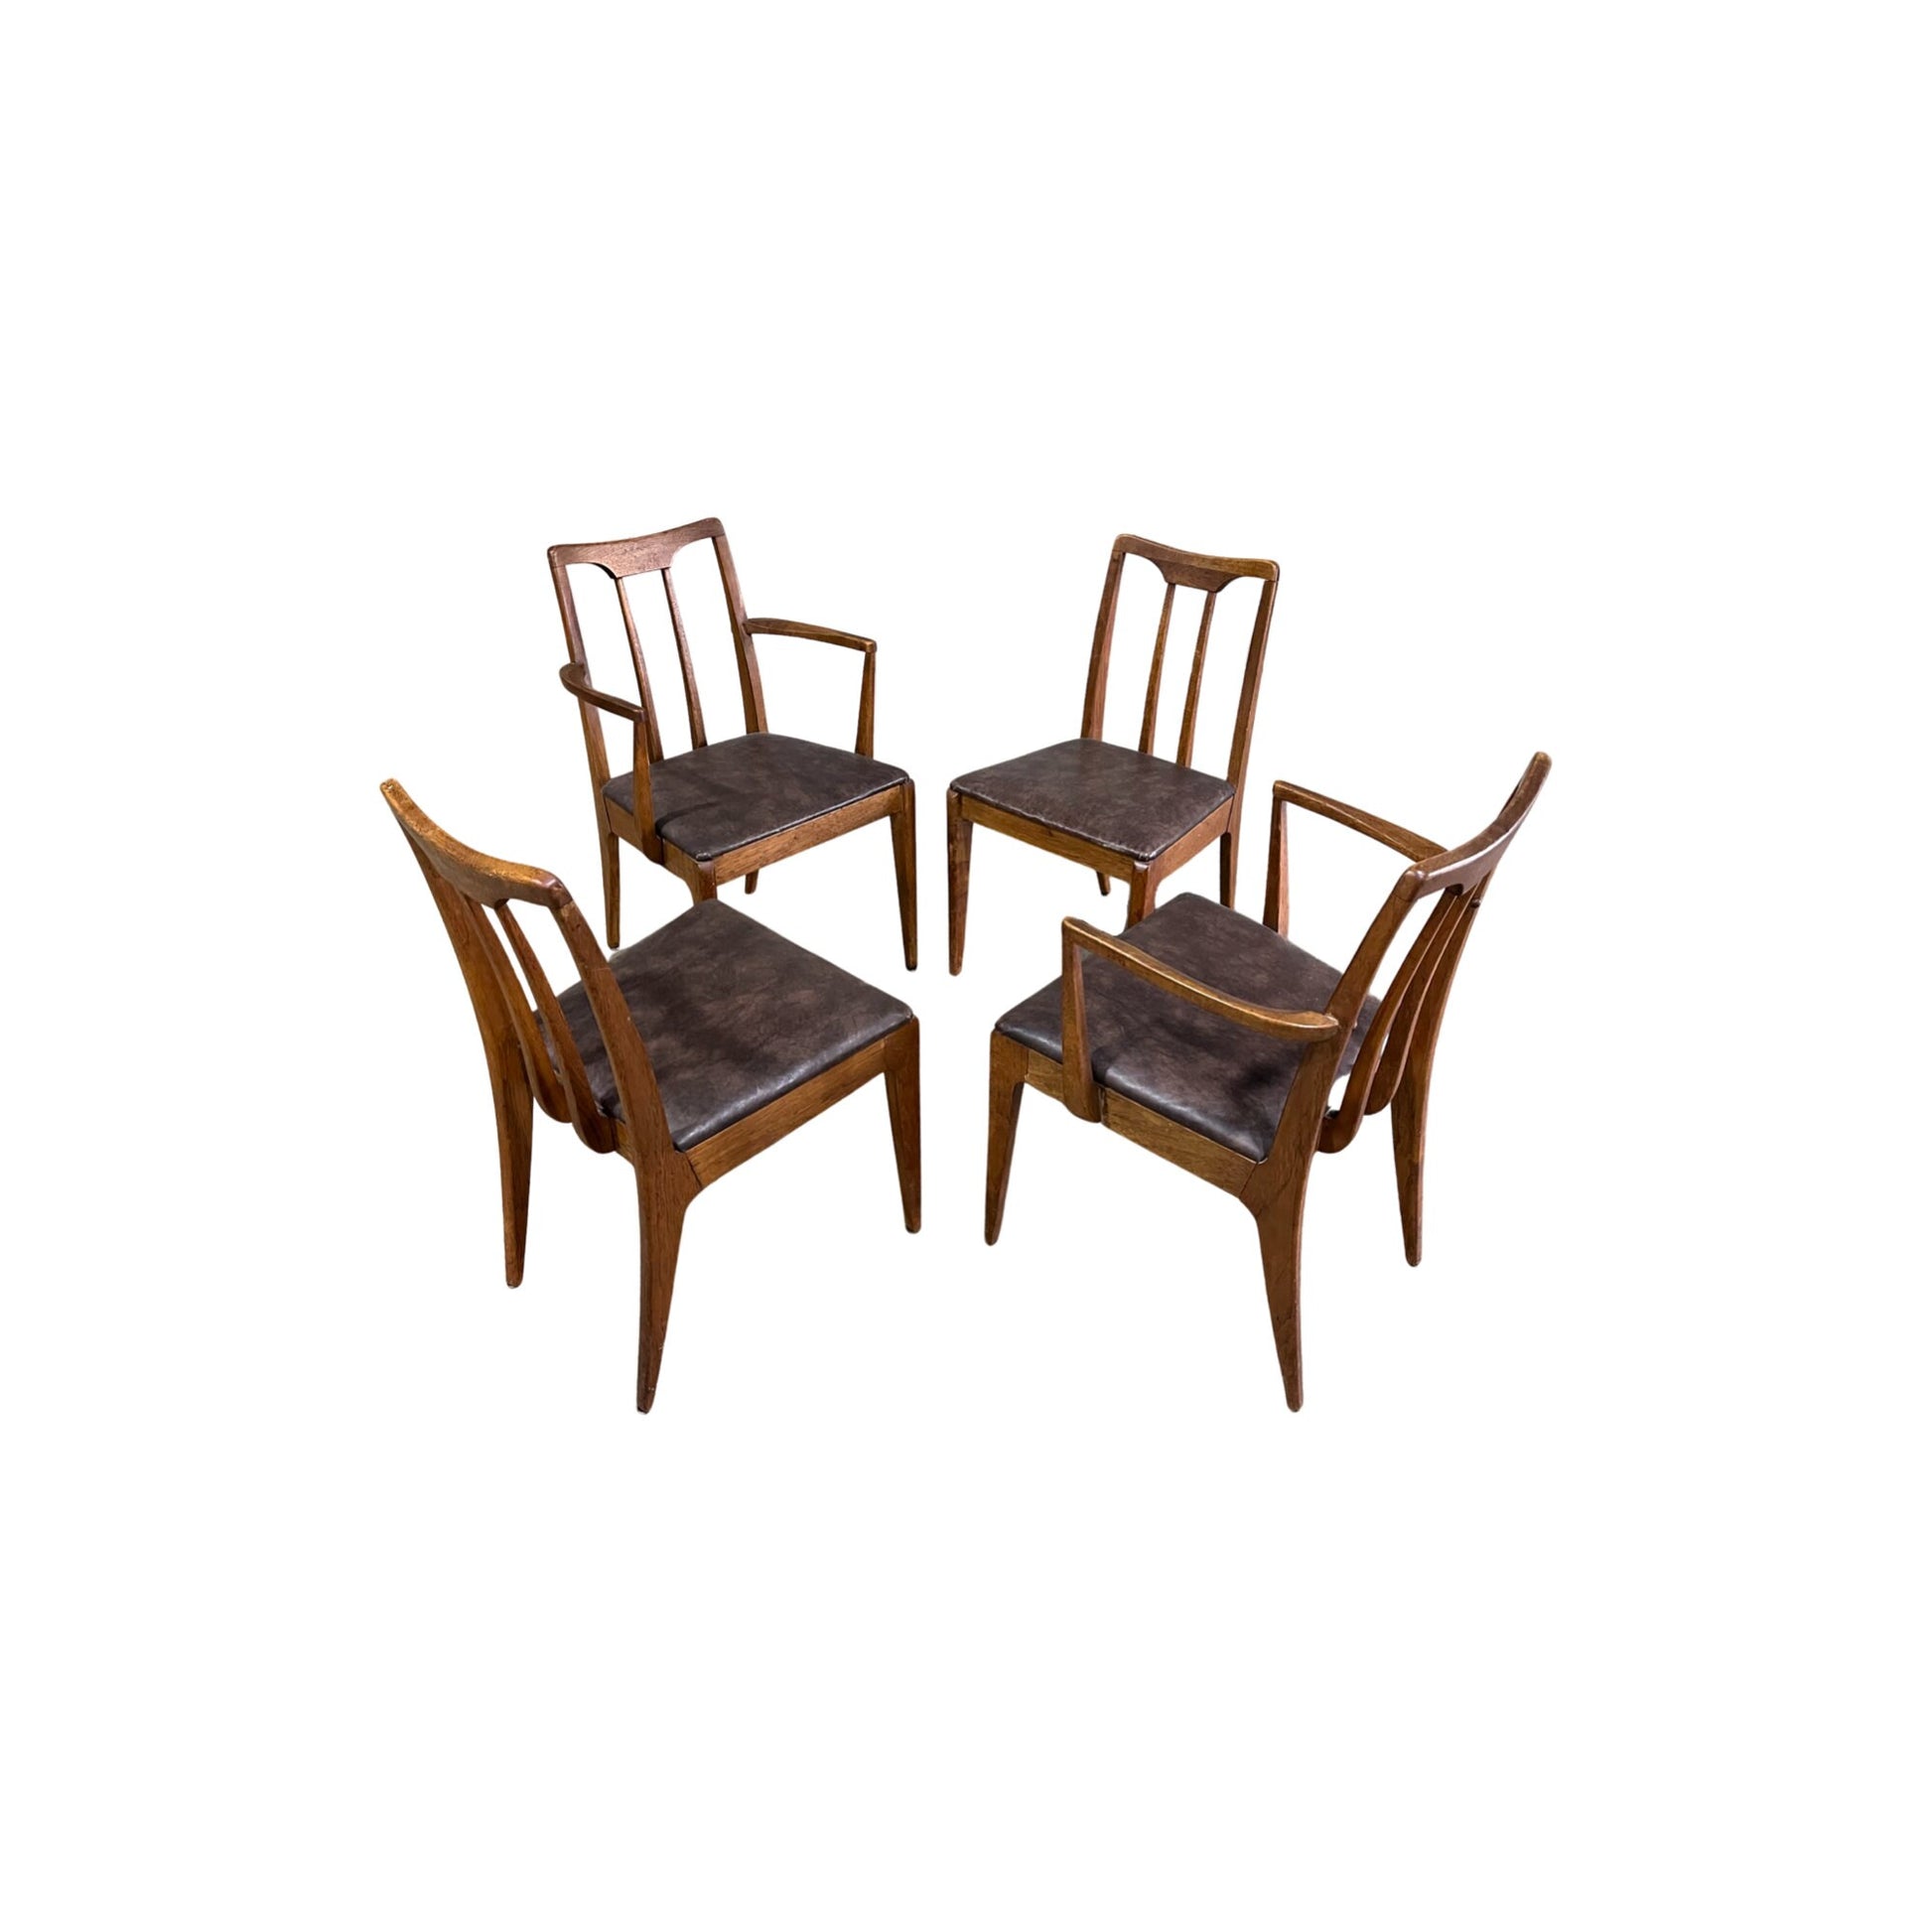 Vintage Drexel Projection Walnut Dining Chairs - Remarkable Wood Grain